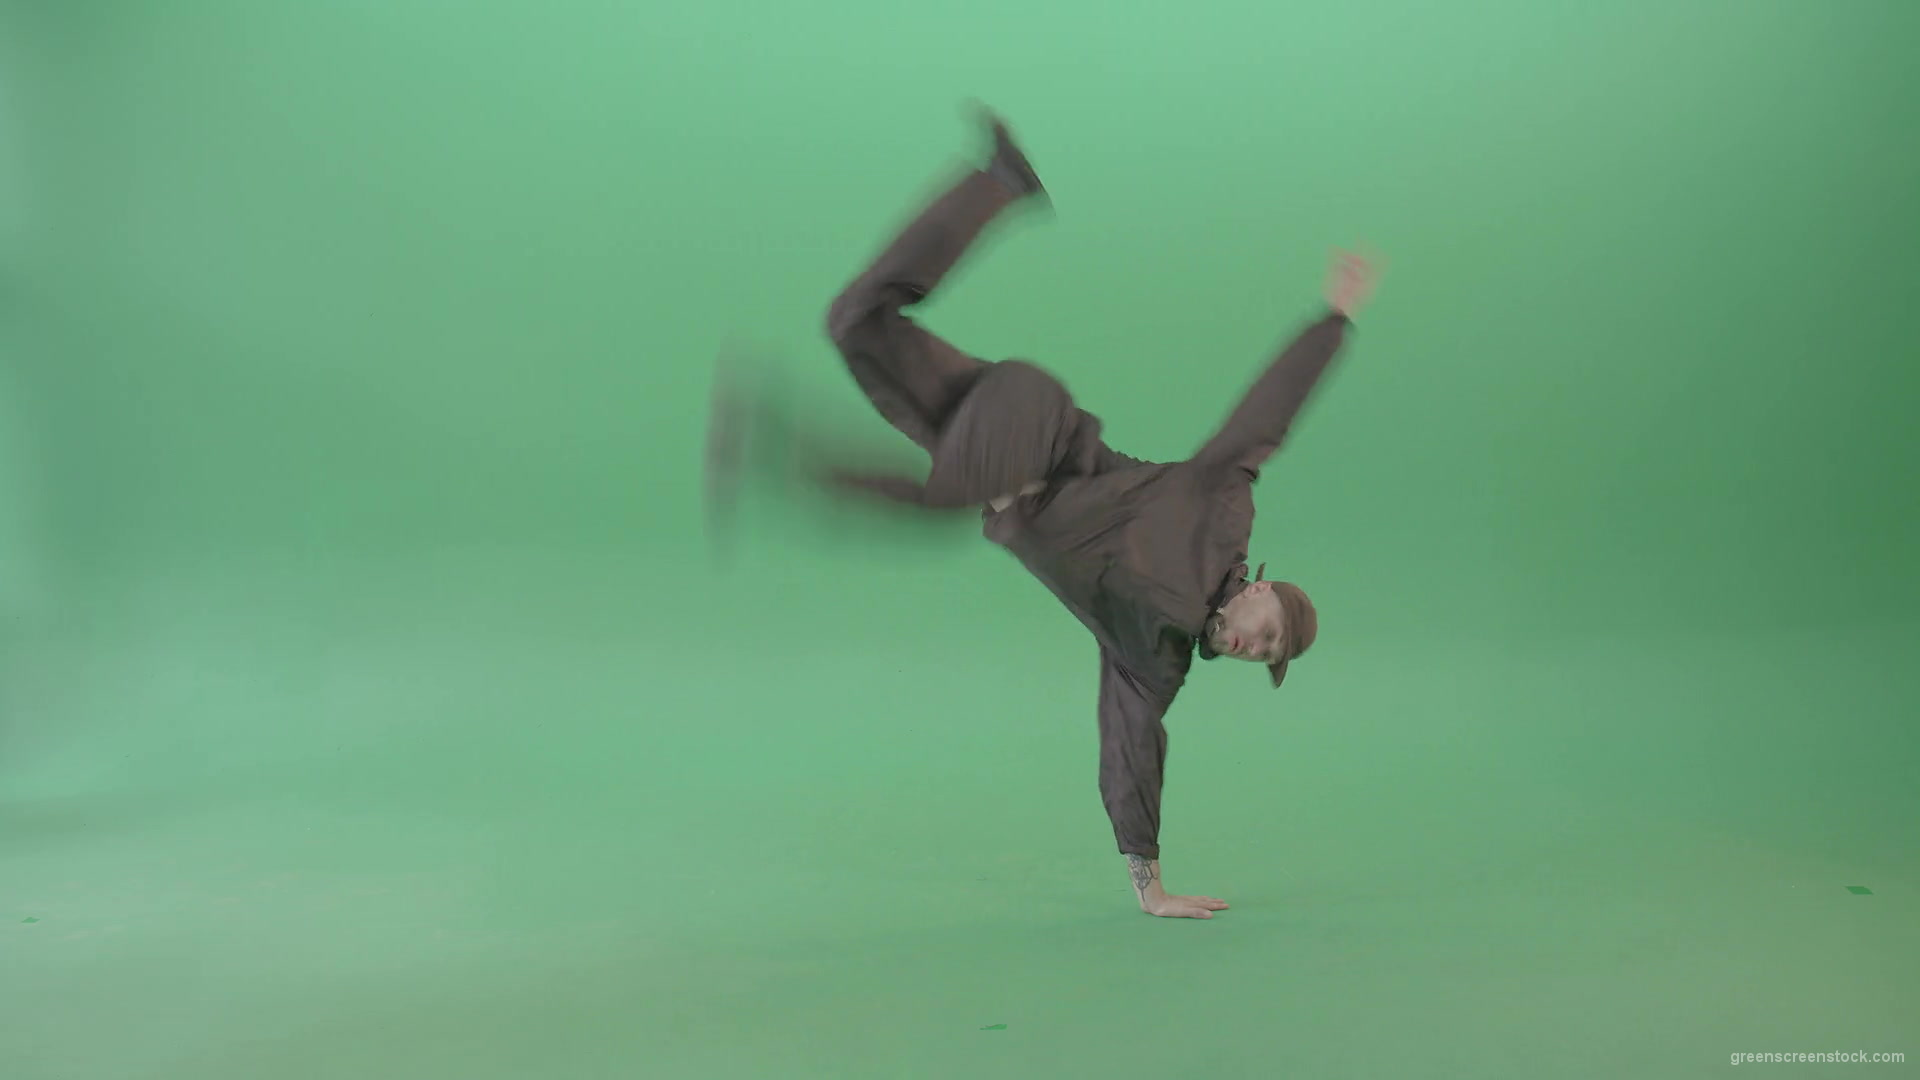 Athlete-Man-making-Air-freeze-on-hand-breaking-on-green-screen-4K-Video-Footage-1920_007 Green Screen Stock